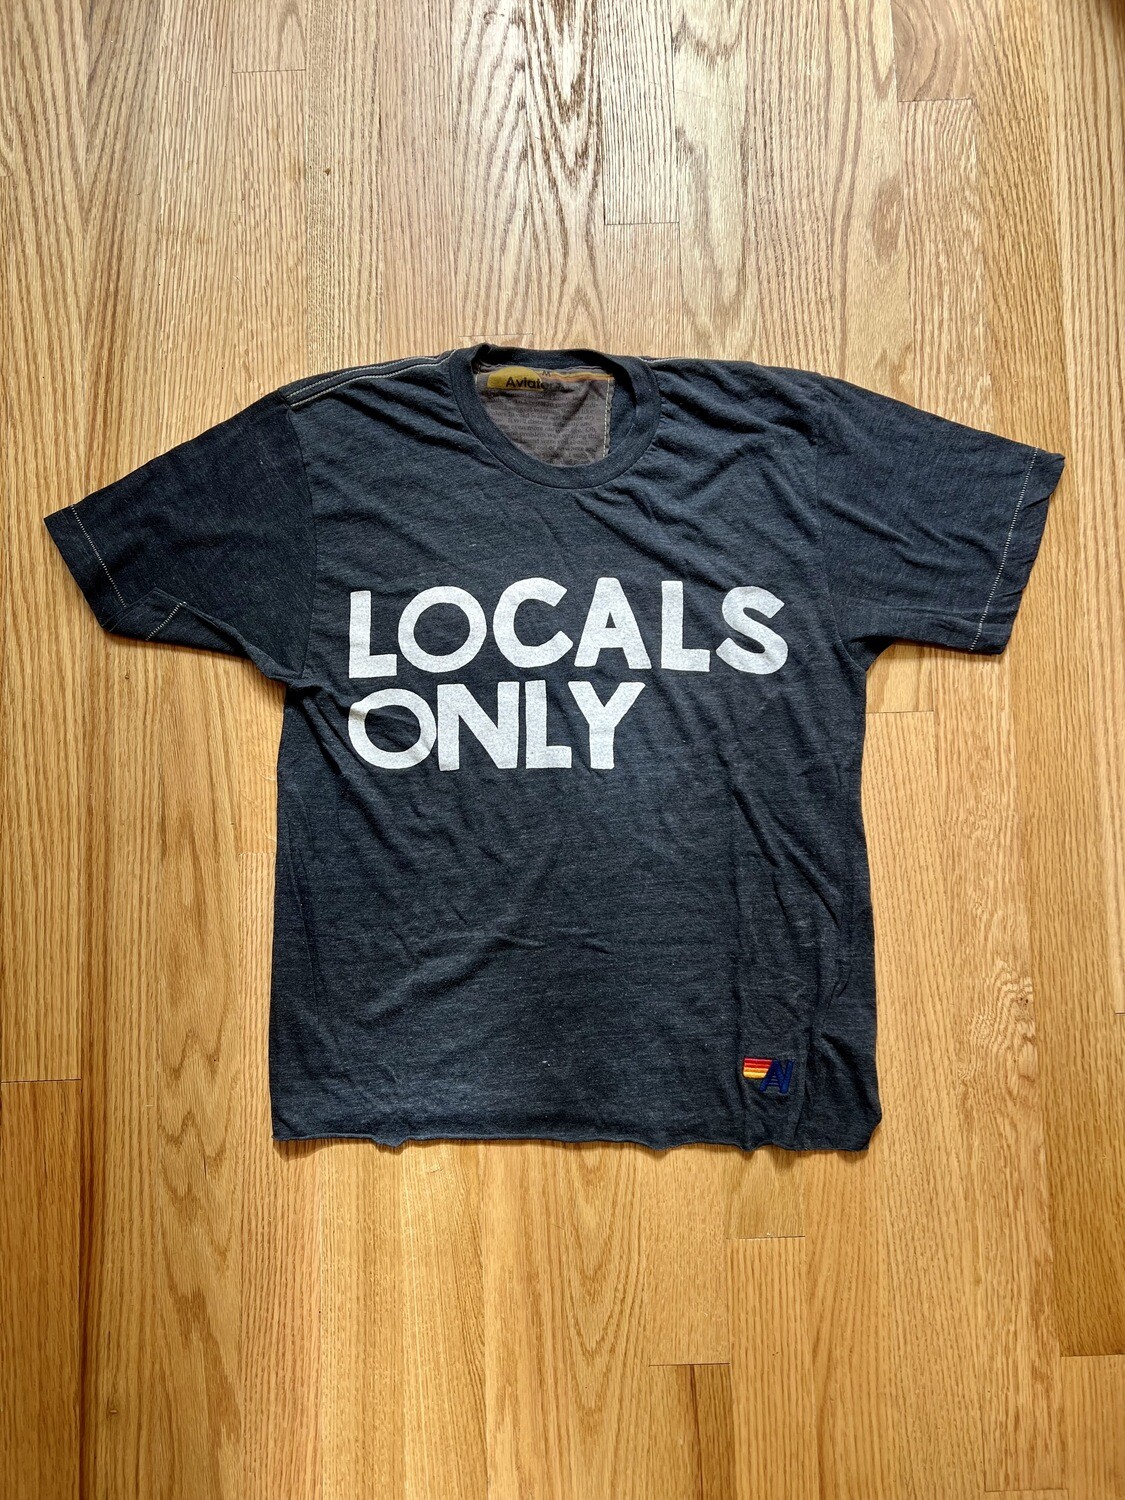 Core72, Aviator Nation, Locals Only